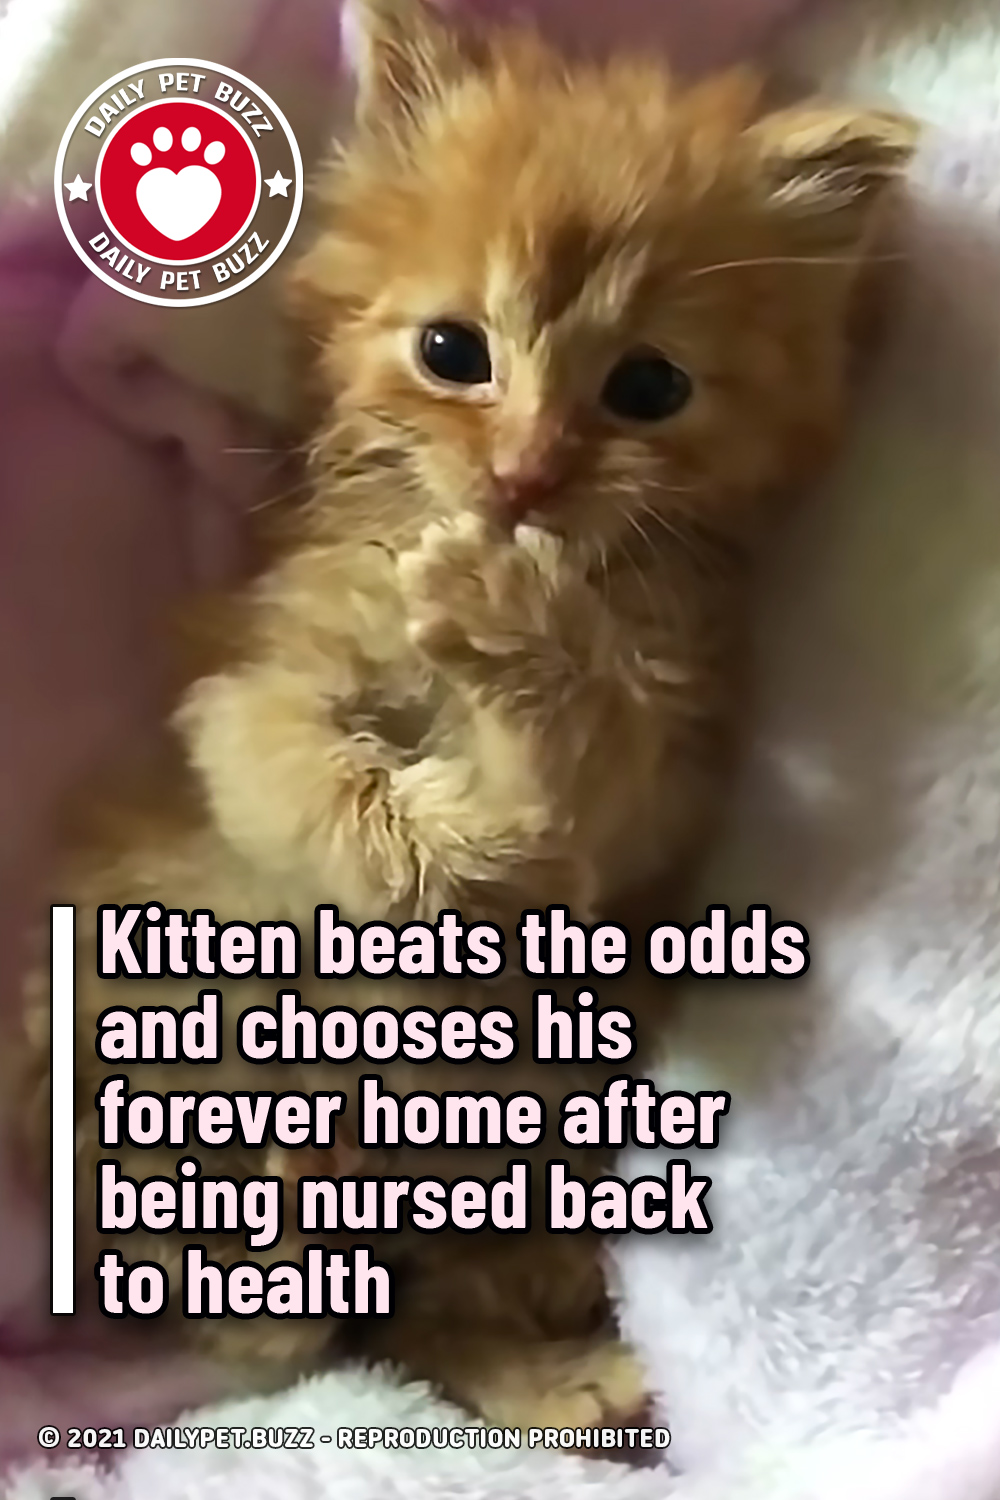 Kitten beats the odds and chooses his forever home after being nursed back to health